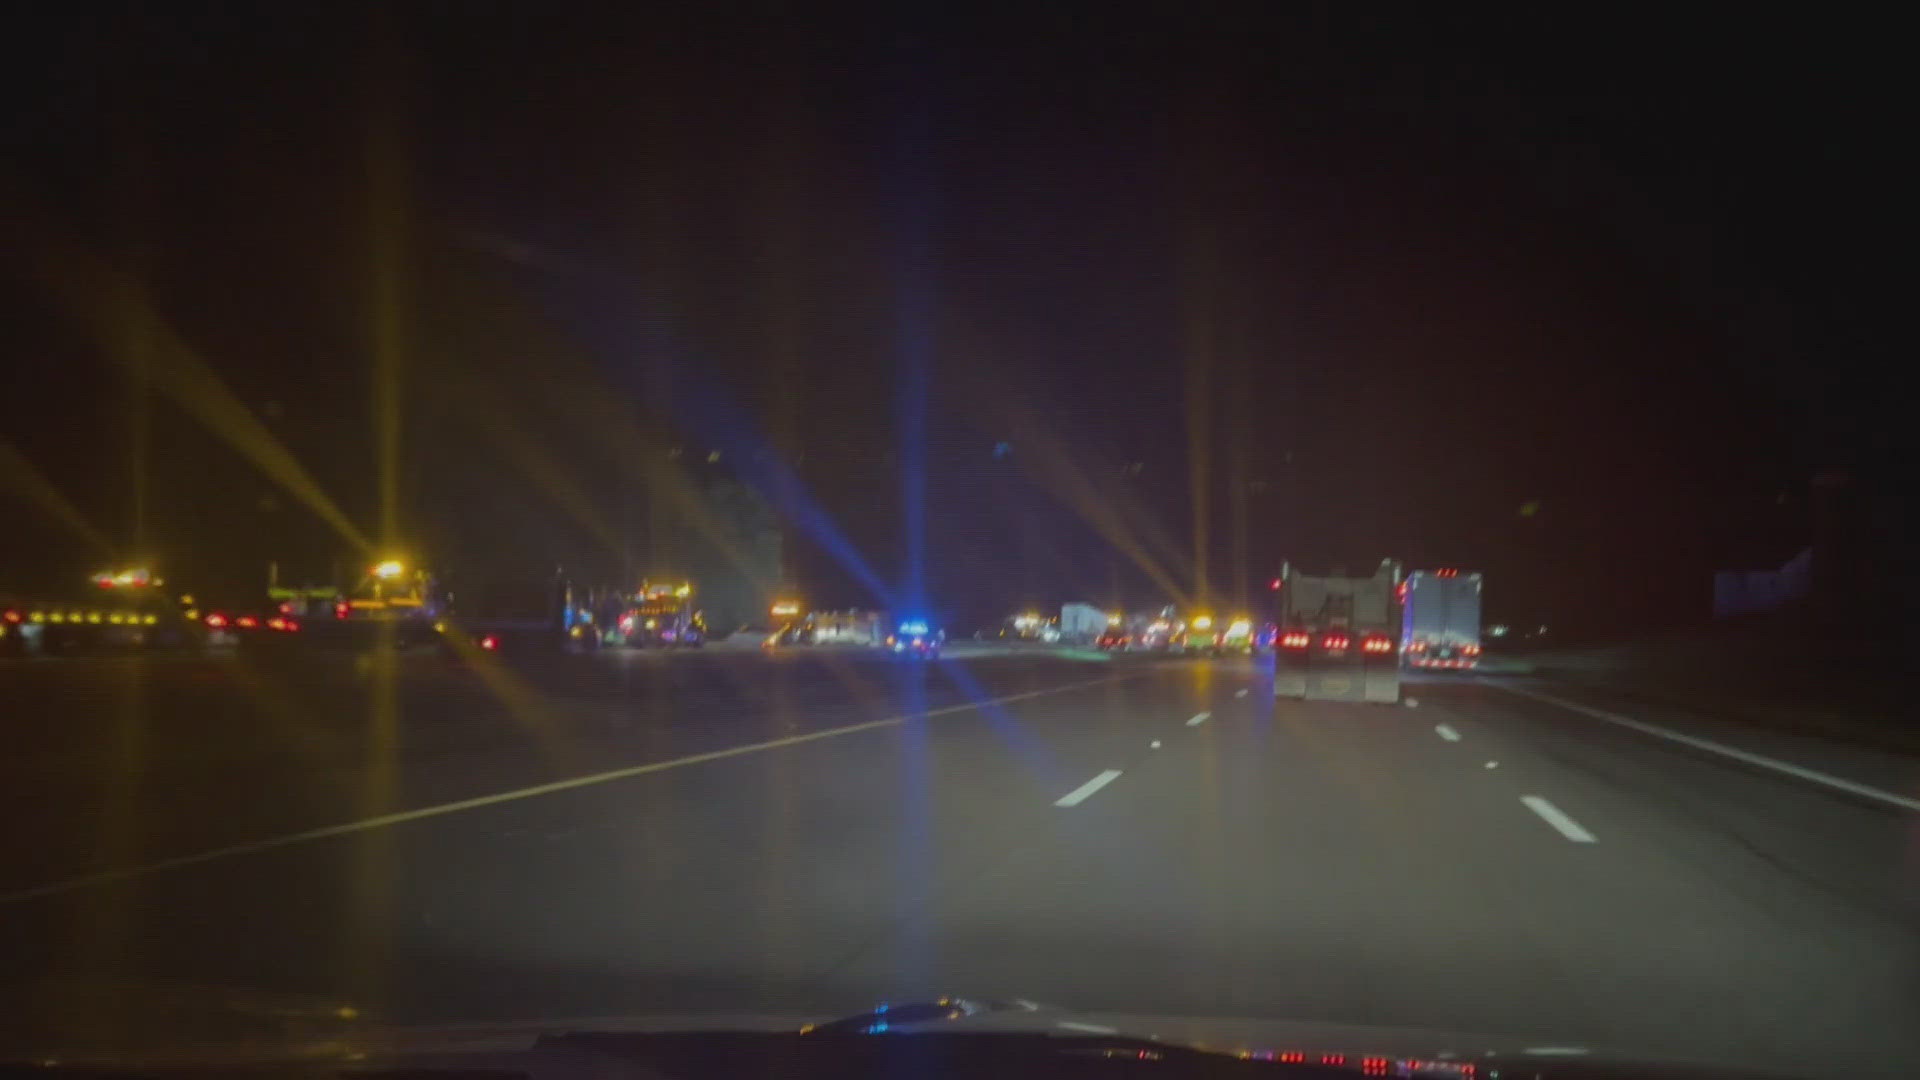 We have new video from the scene of the crash on I-71 in Richland County.